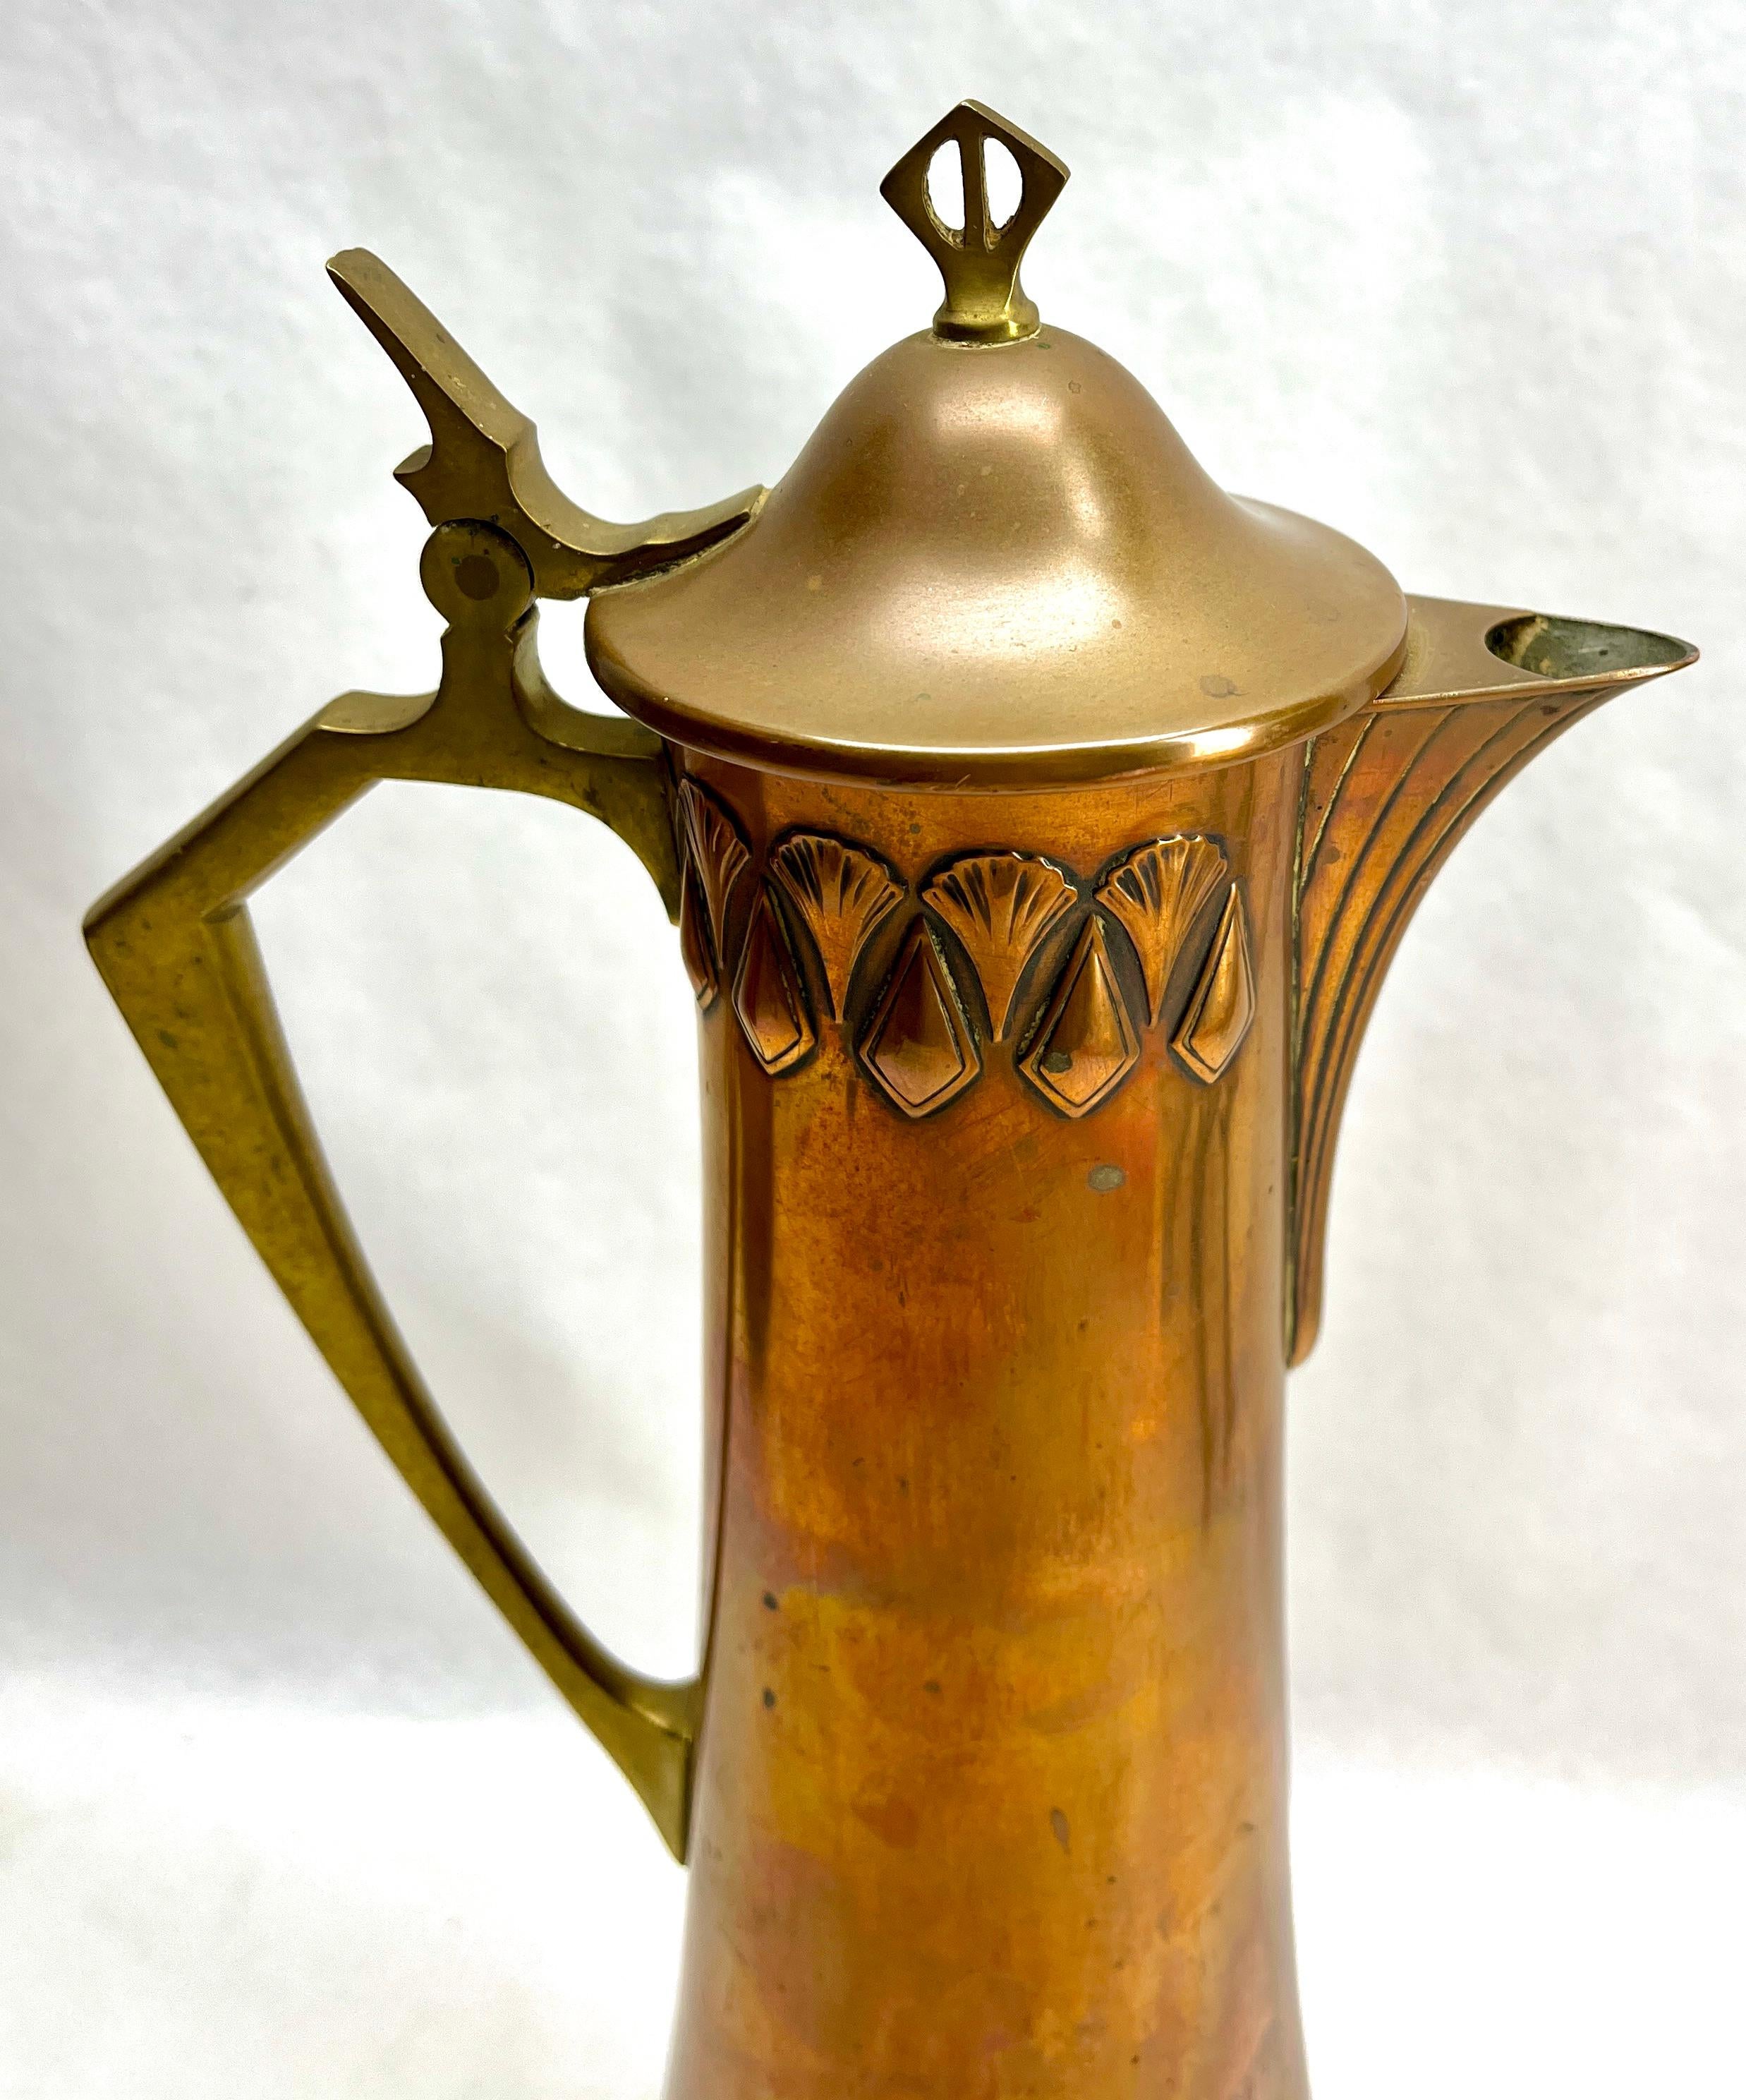 Early 20th Century Art Nouveau Signed WMF Pitcher Brass and Copper  with Handle and Organic Details For Sale